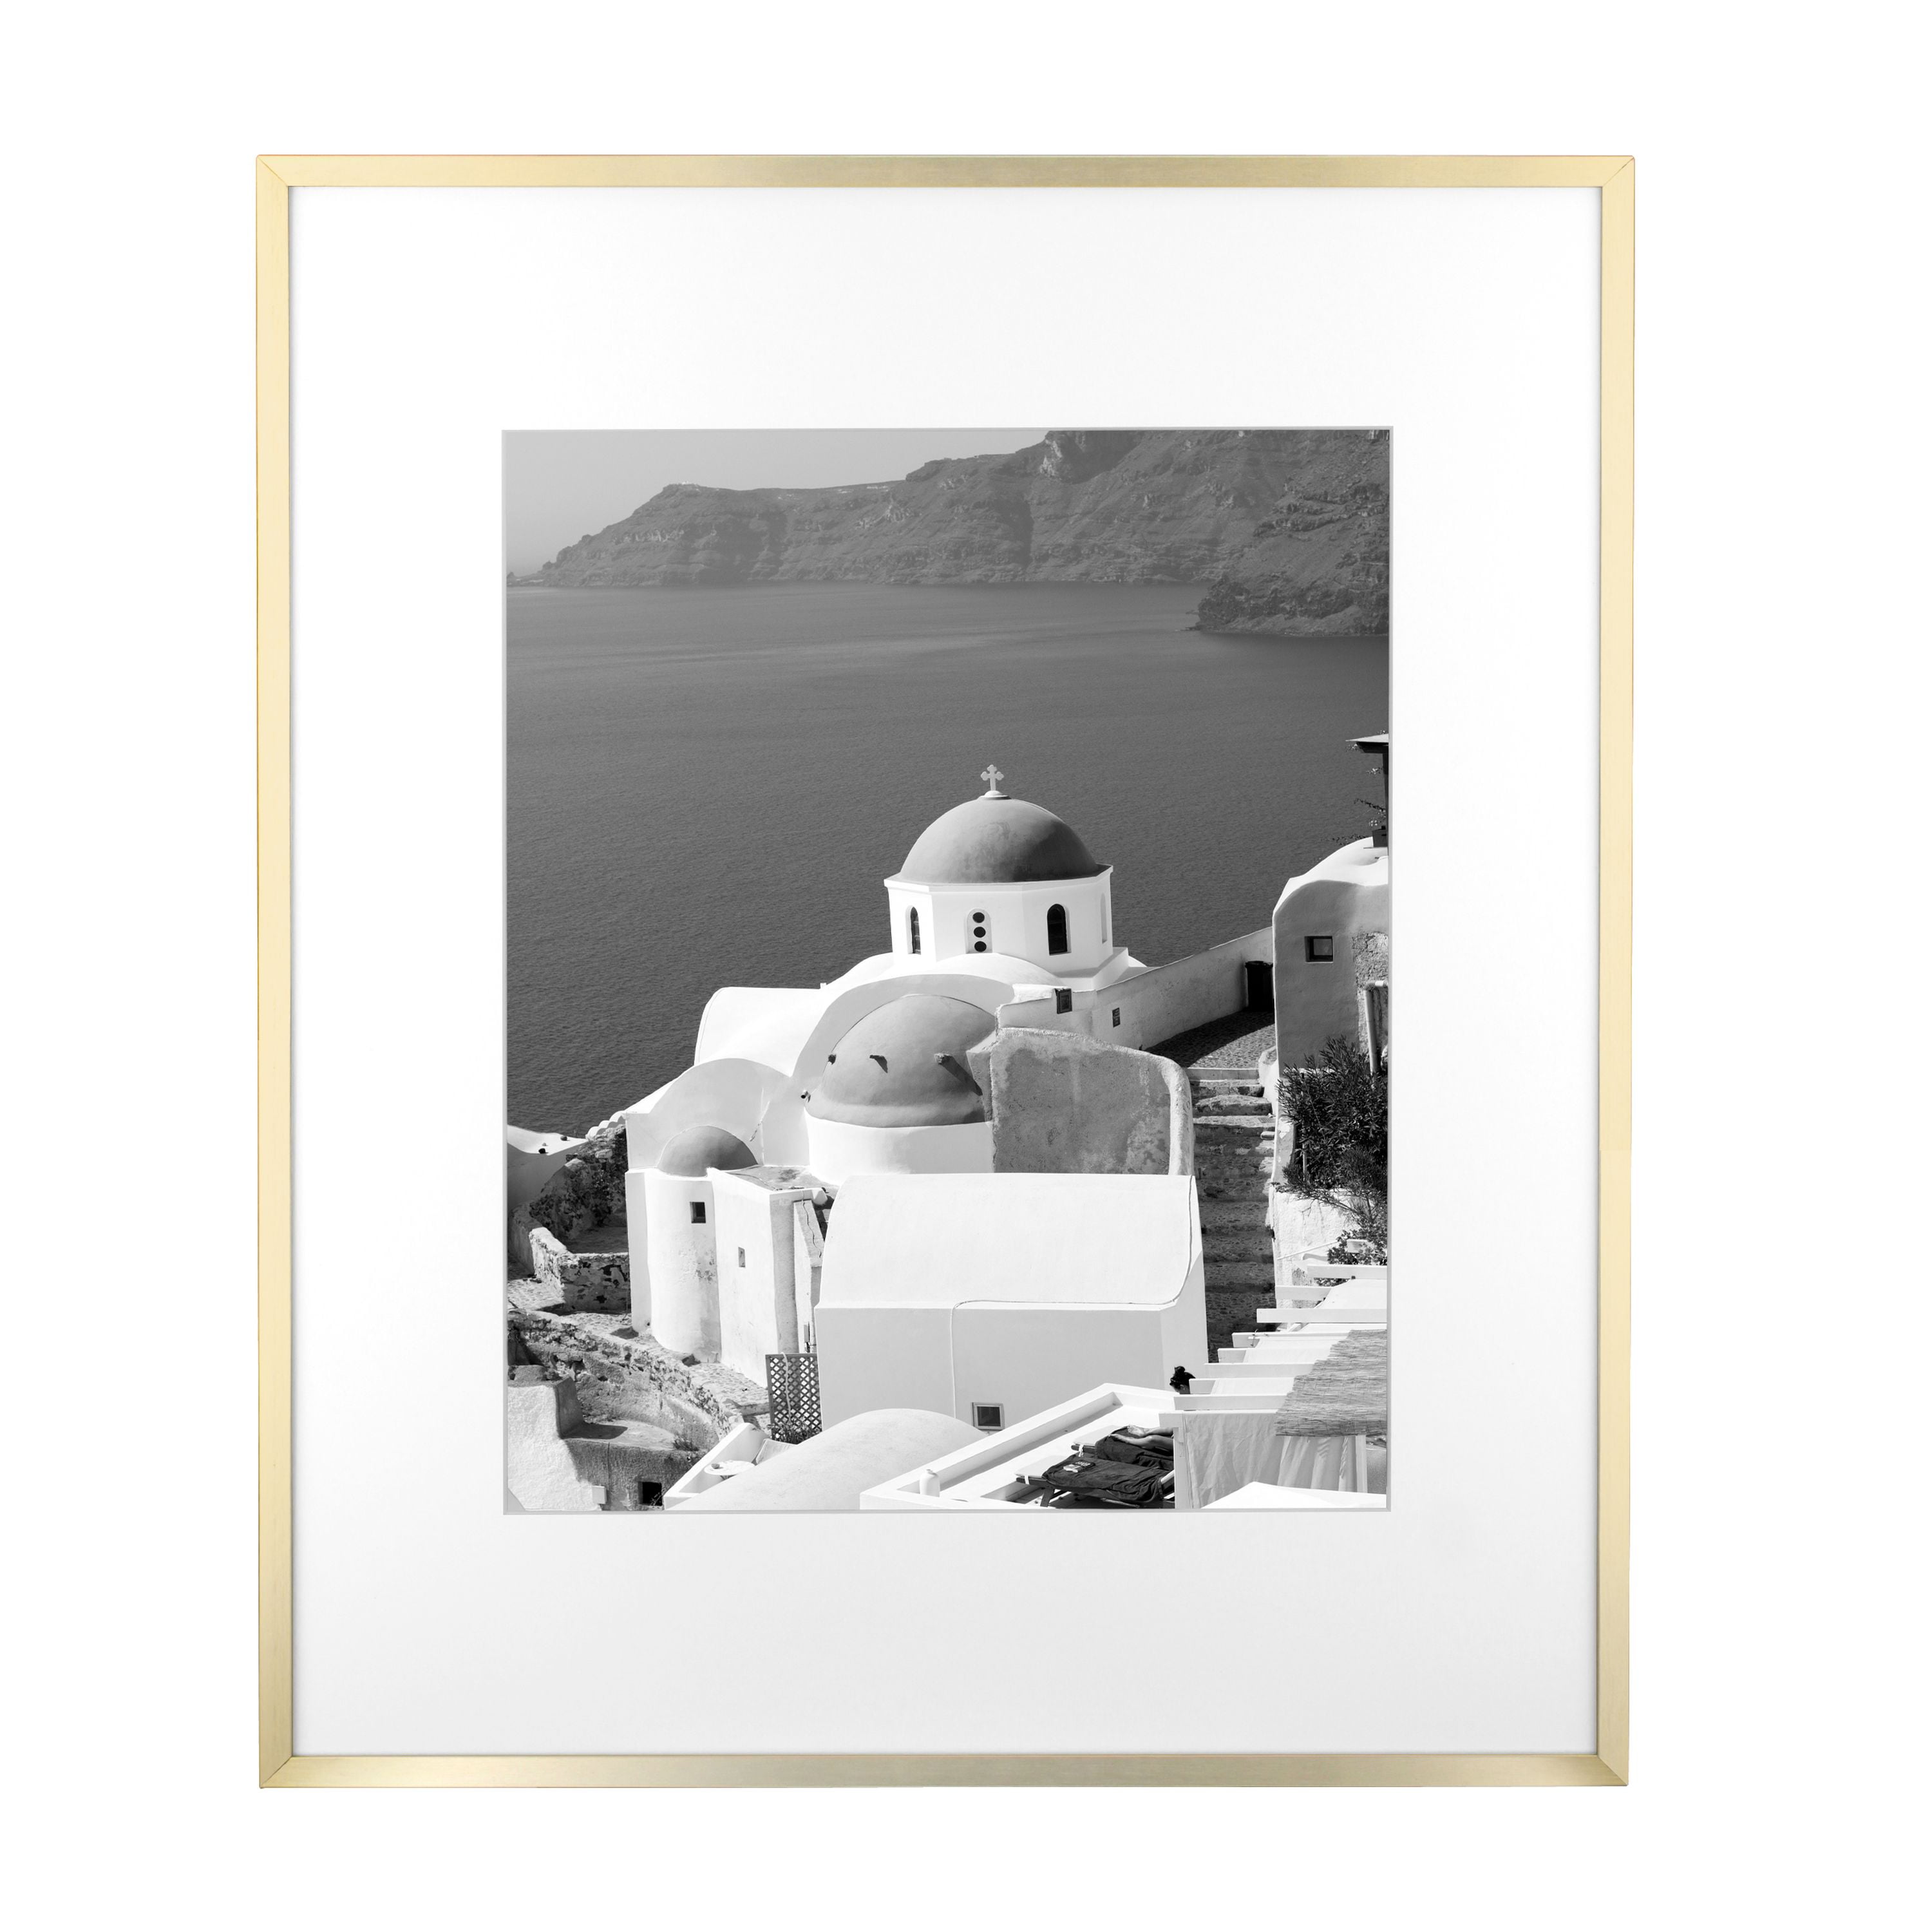 How to Frame a Photo Print on the Cheap - Improve Photography